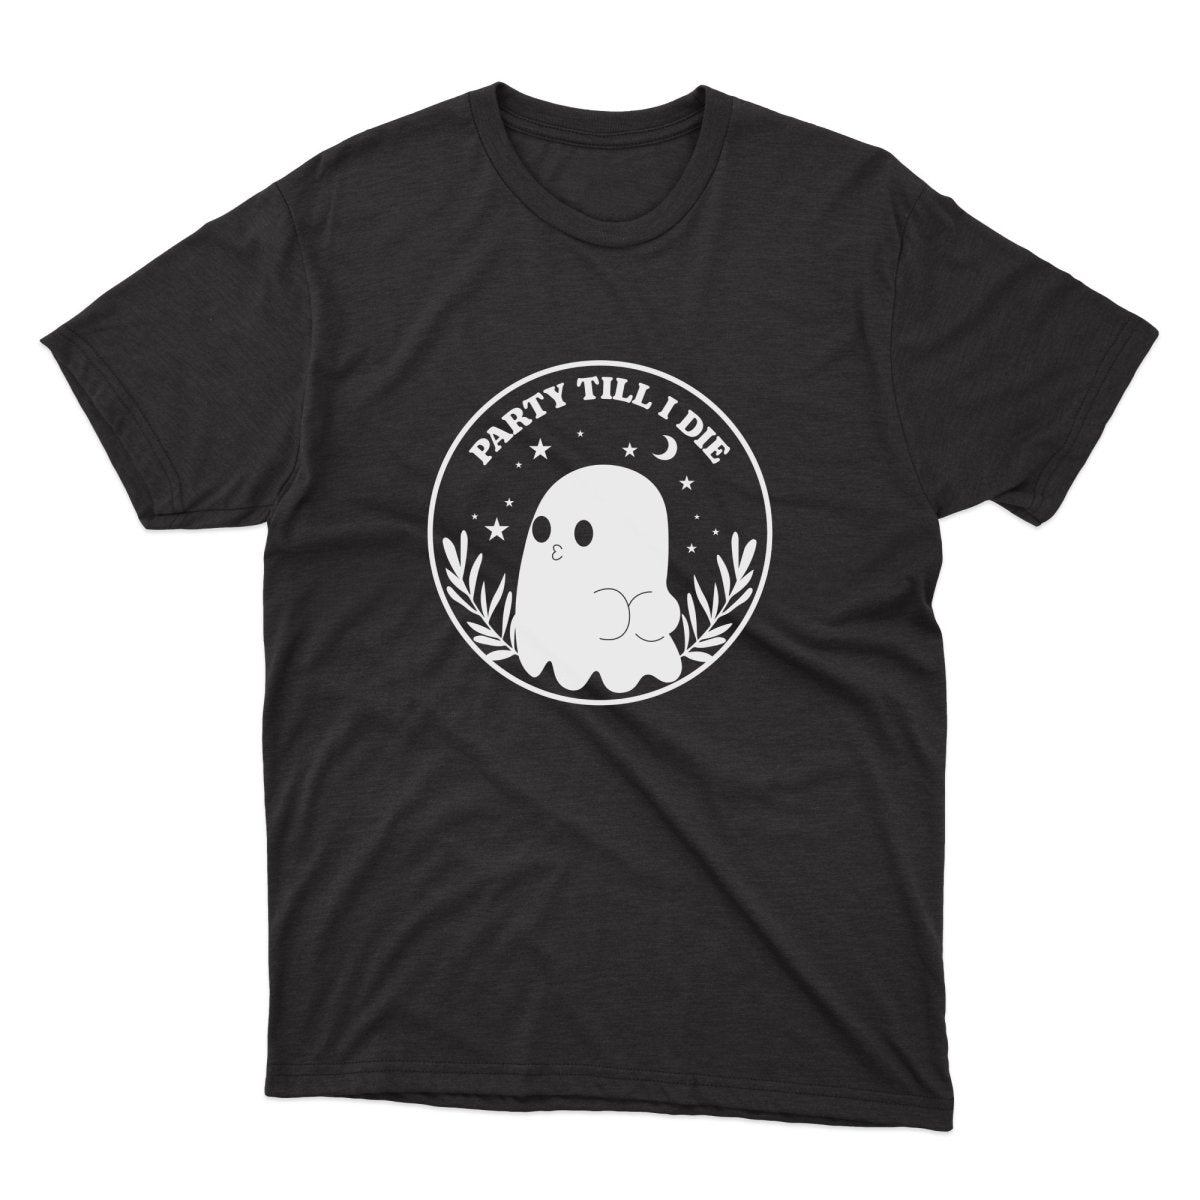 Party Till I Die Shirt - stickerbullParty Till I Die ShirtShirtsPrintifystickerbull20277535479931428066BlackSa black t - shirt with an image of a ghost